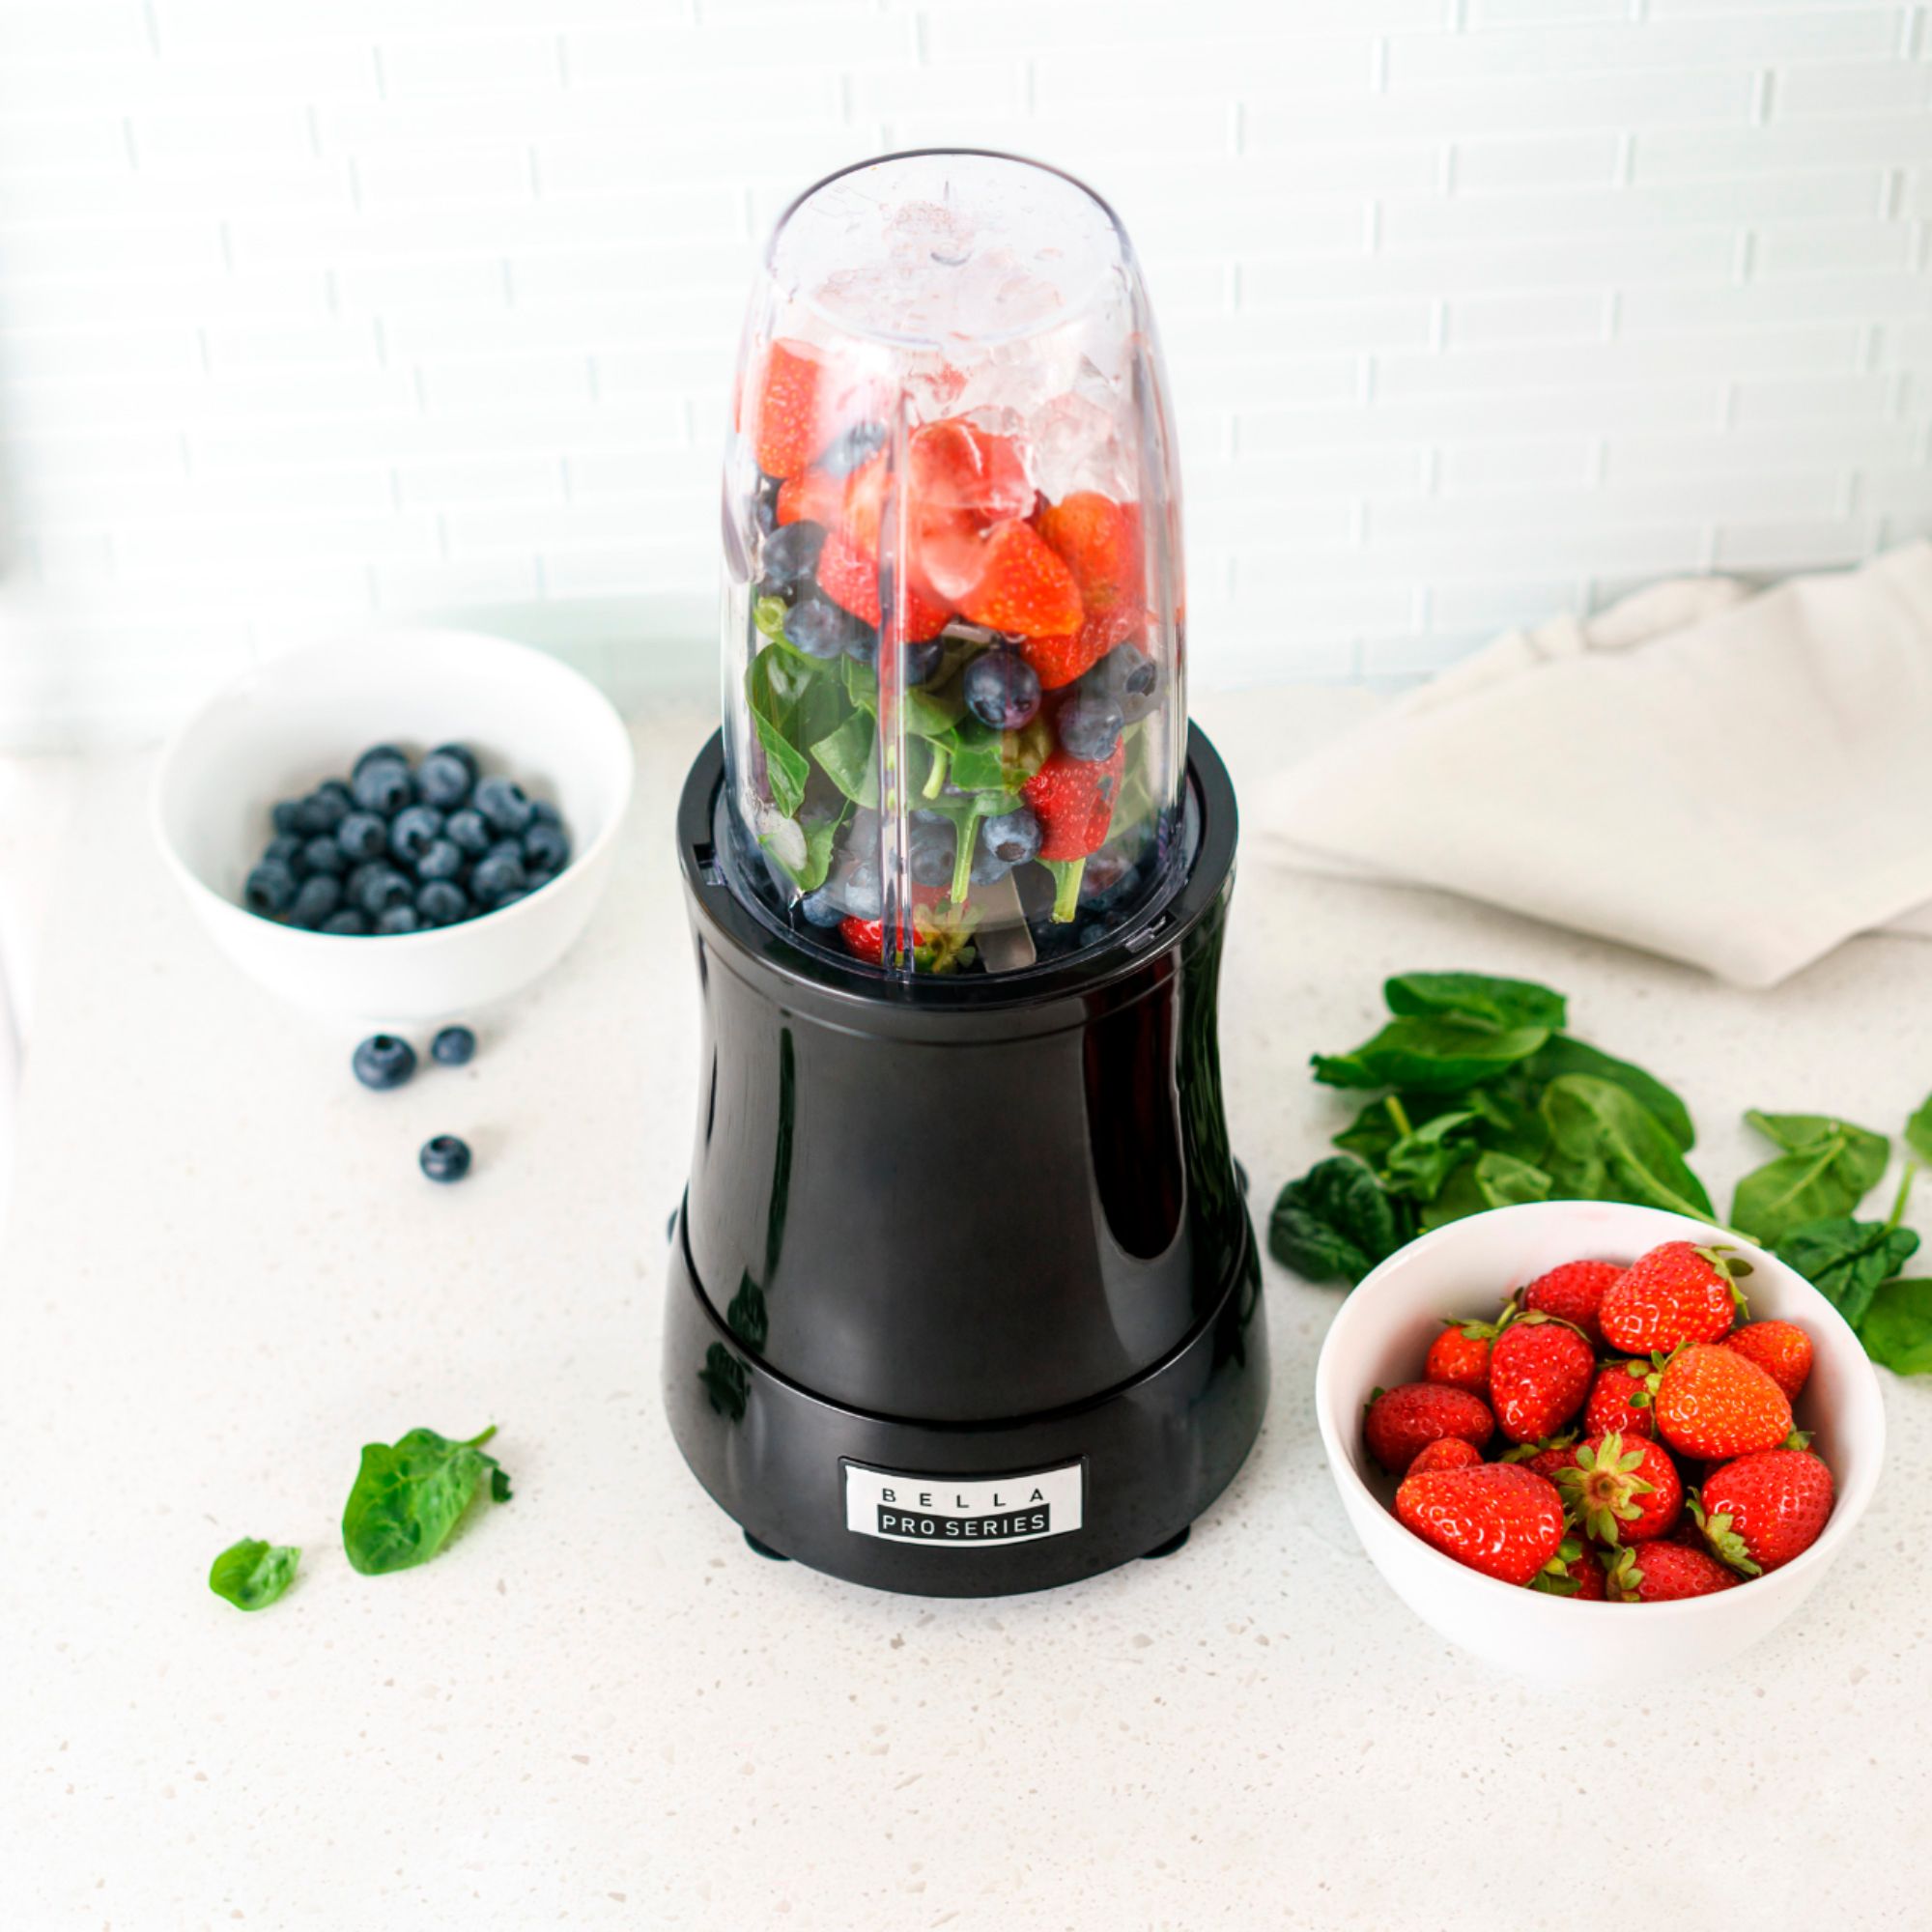 Bella Pro Series - Portable To-Go Blender - Black - The WiC Project -  Faith, Product Reviews, Recipes, Giveaways